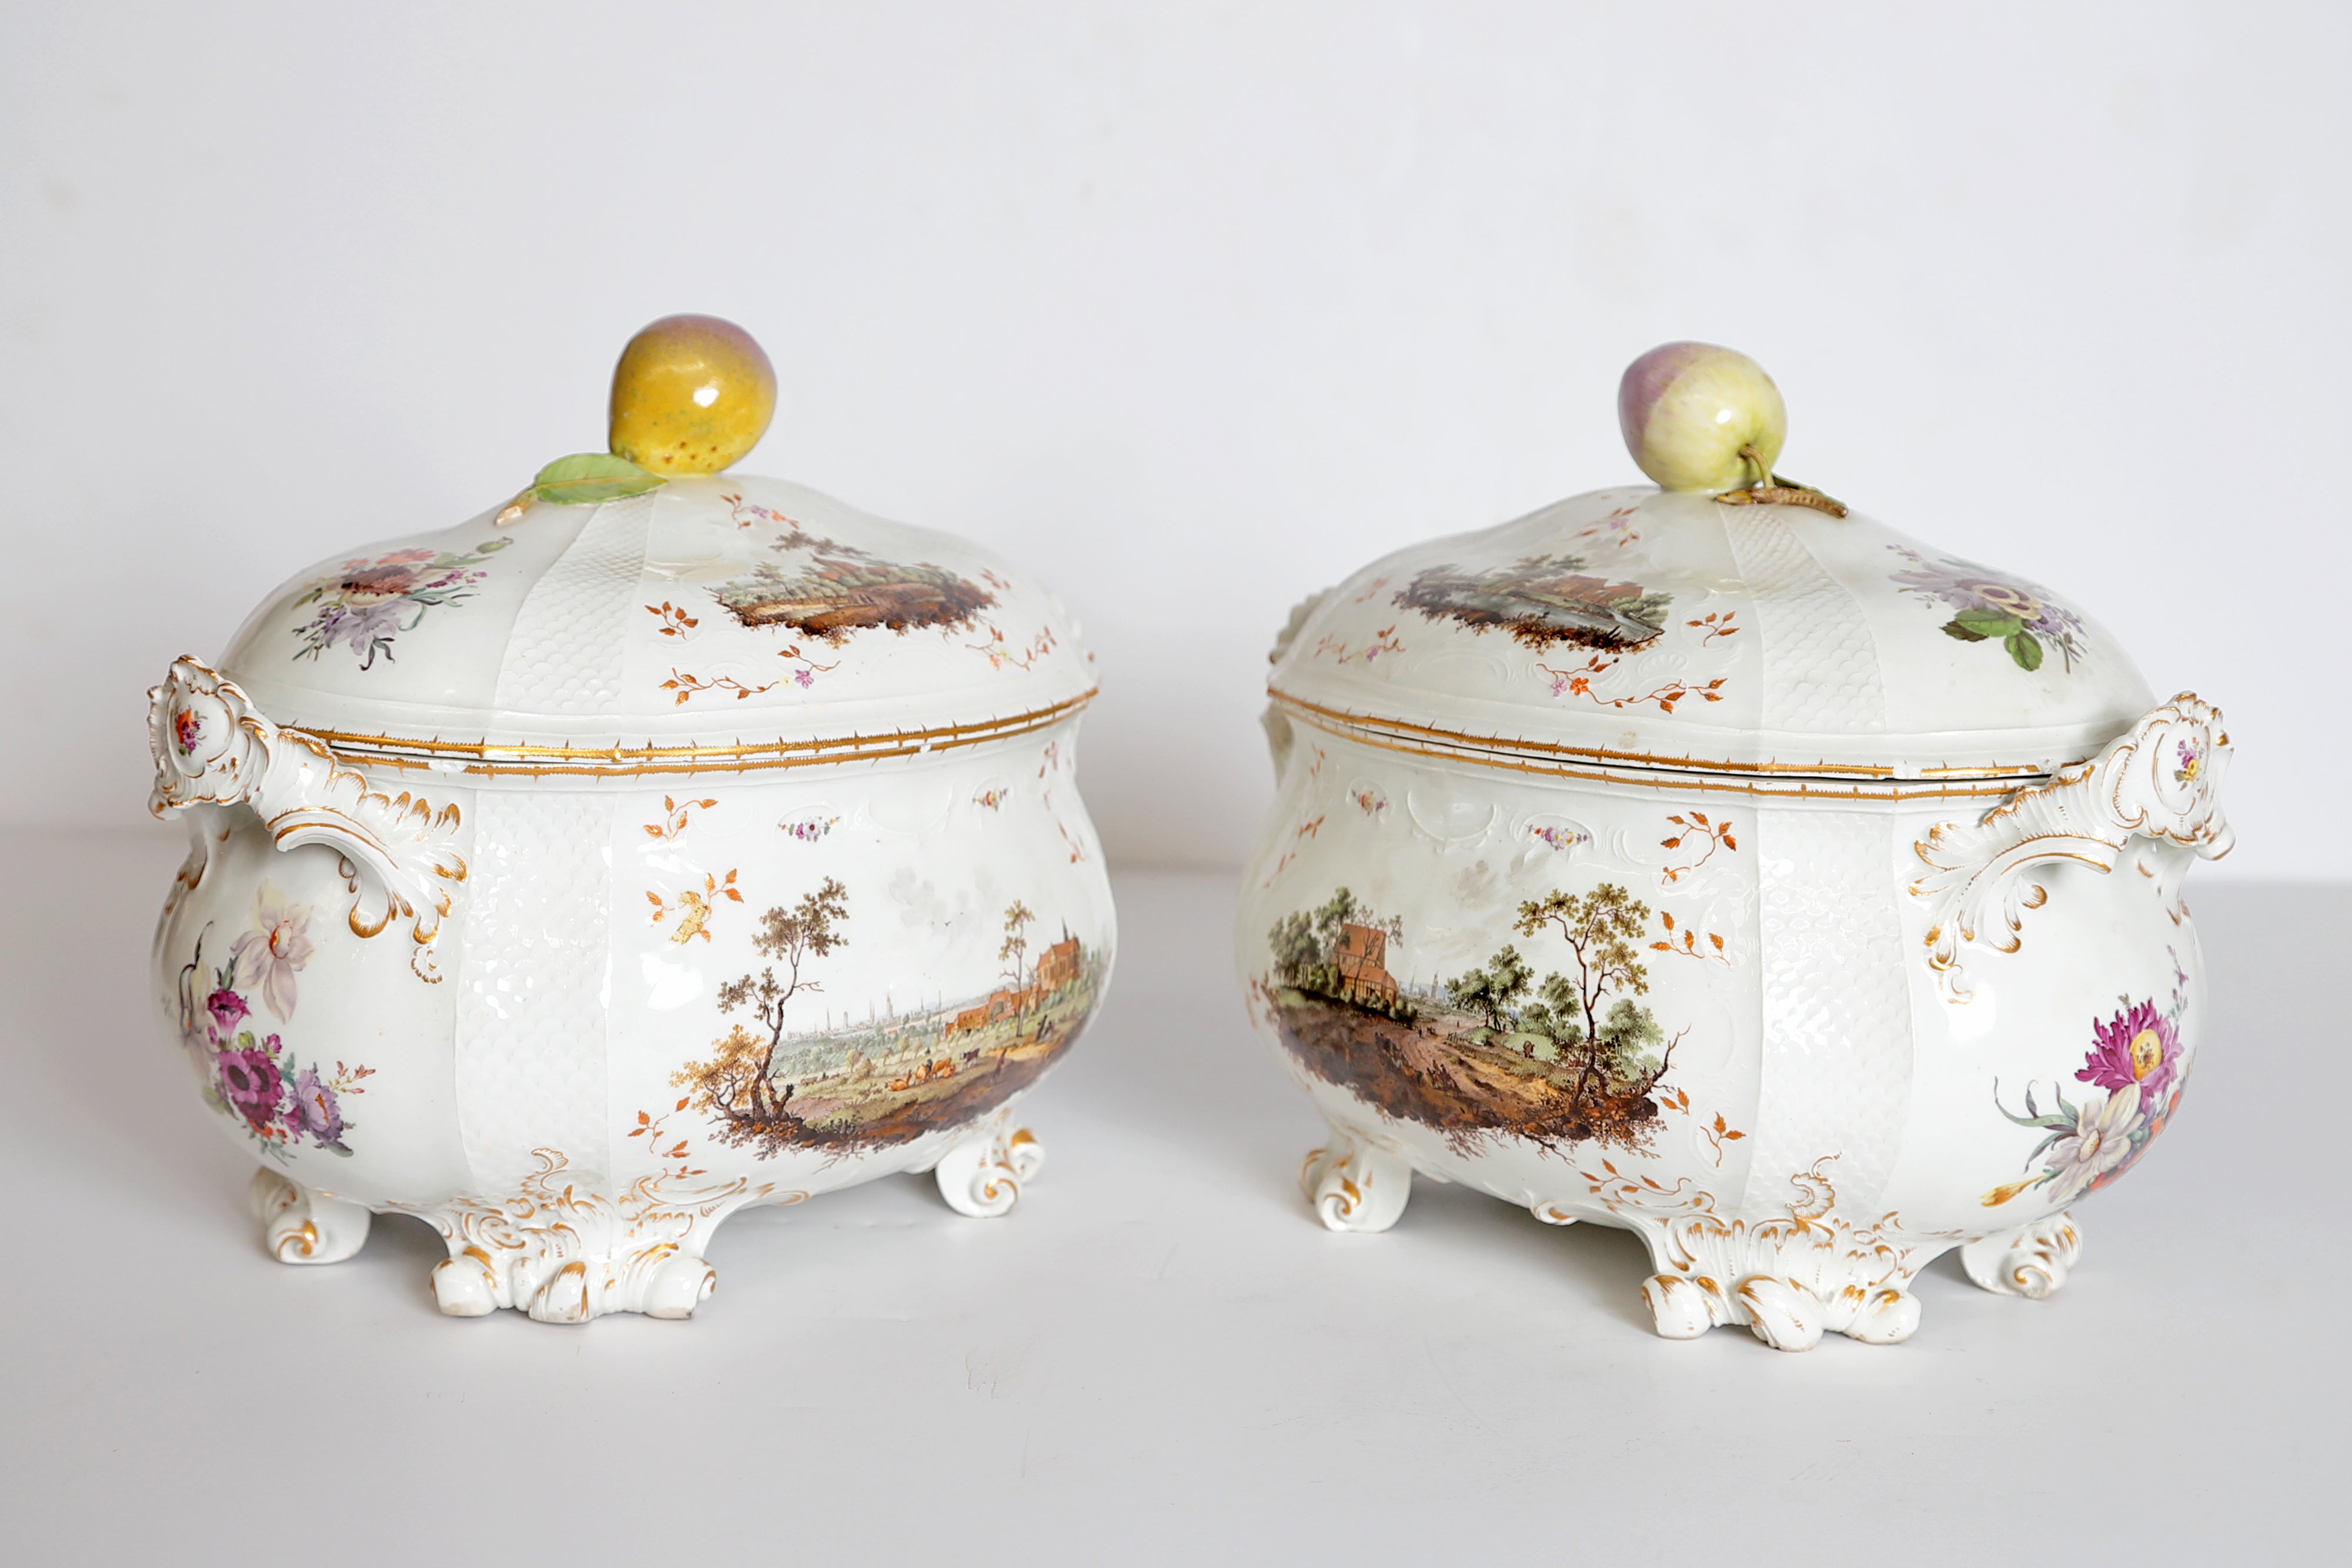 A Pair of Important Furstenberg Porcelain Oval Two-Handled Tureens